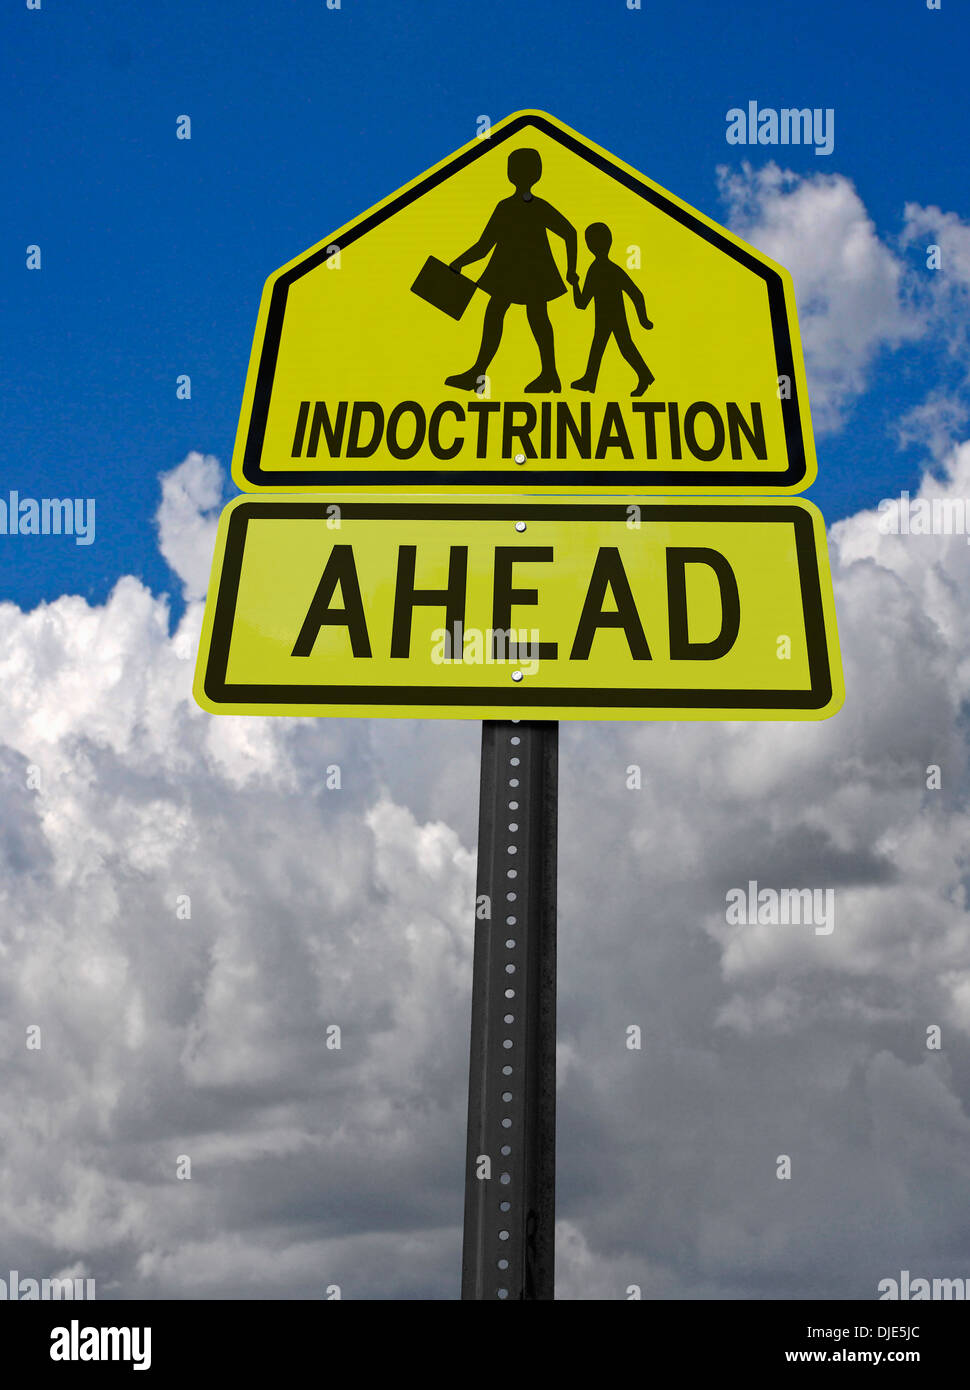 indoctrination ahead warning sign with children symbol Stock Photo - Alamy